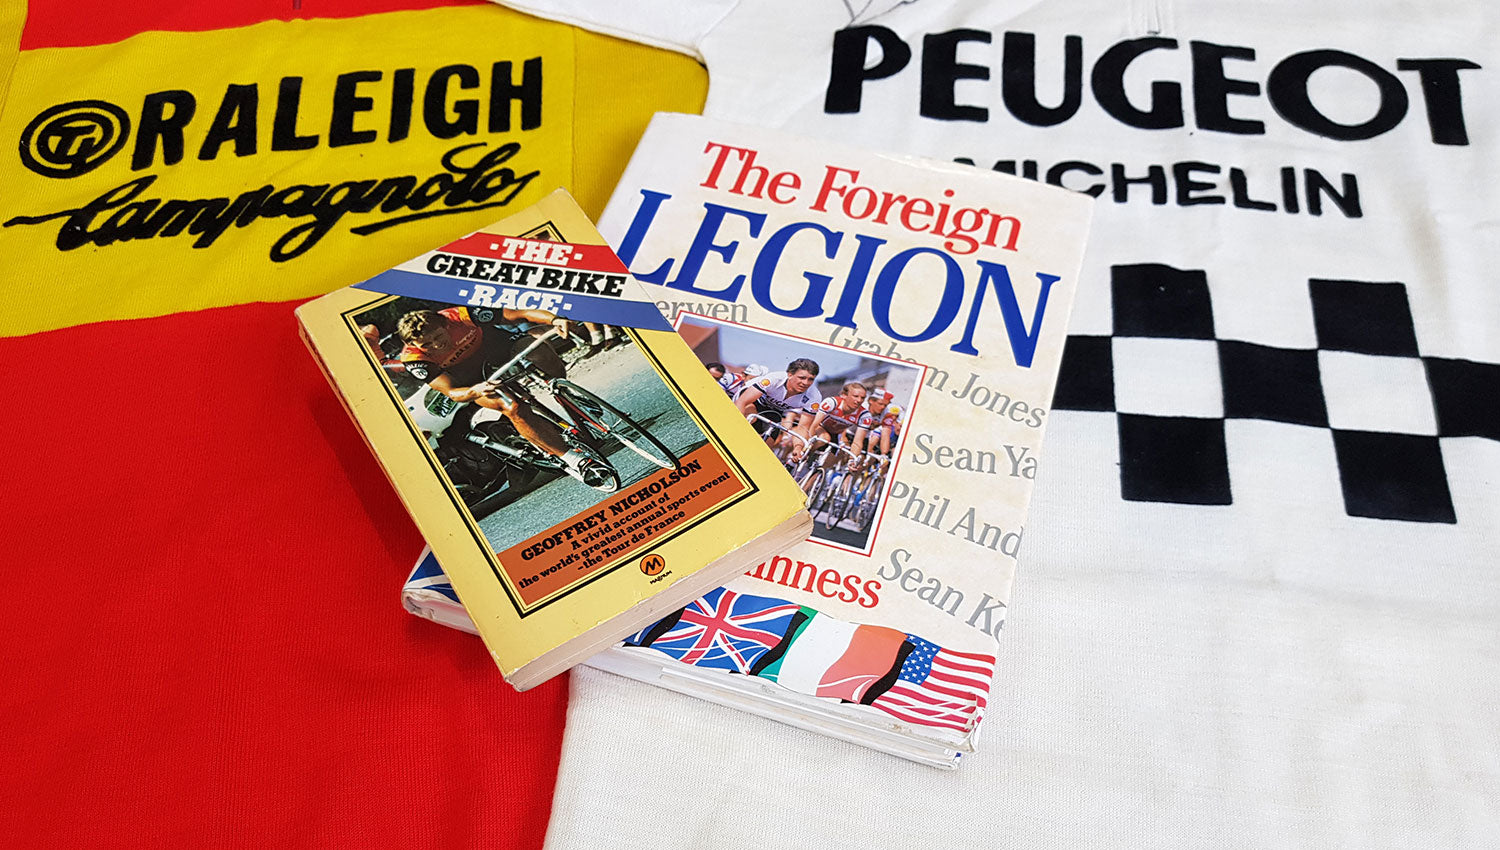 The Great Bike Race by Geoff Nicholson and The Foreign Legion by Rupert Guinness.  Both published a long time before cycling books were a popular line in your local bookshop.